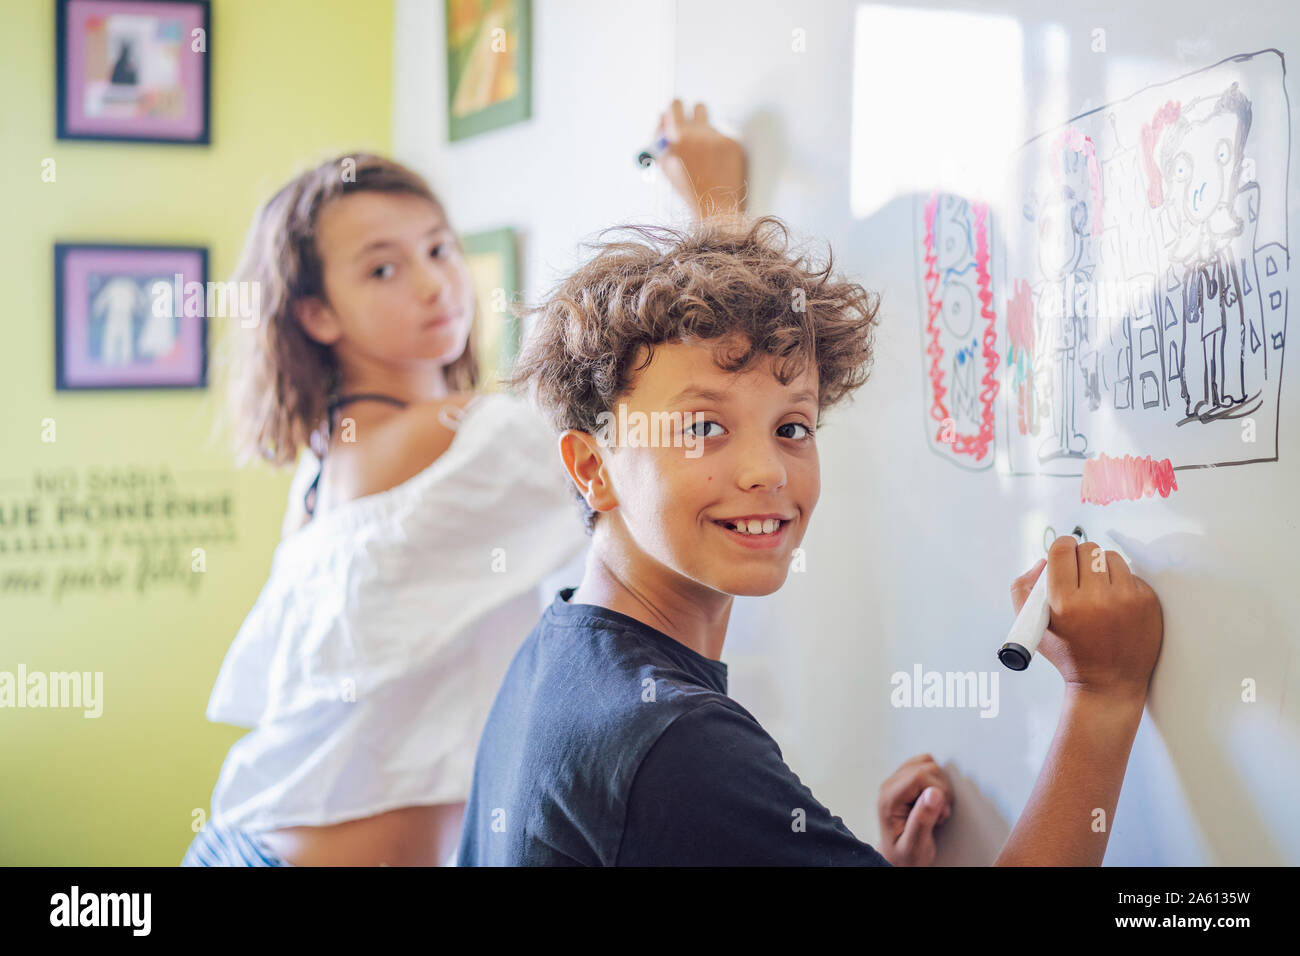 Portrait of smiling boy drawing on a whiteboard with girl in background Stock Photo